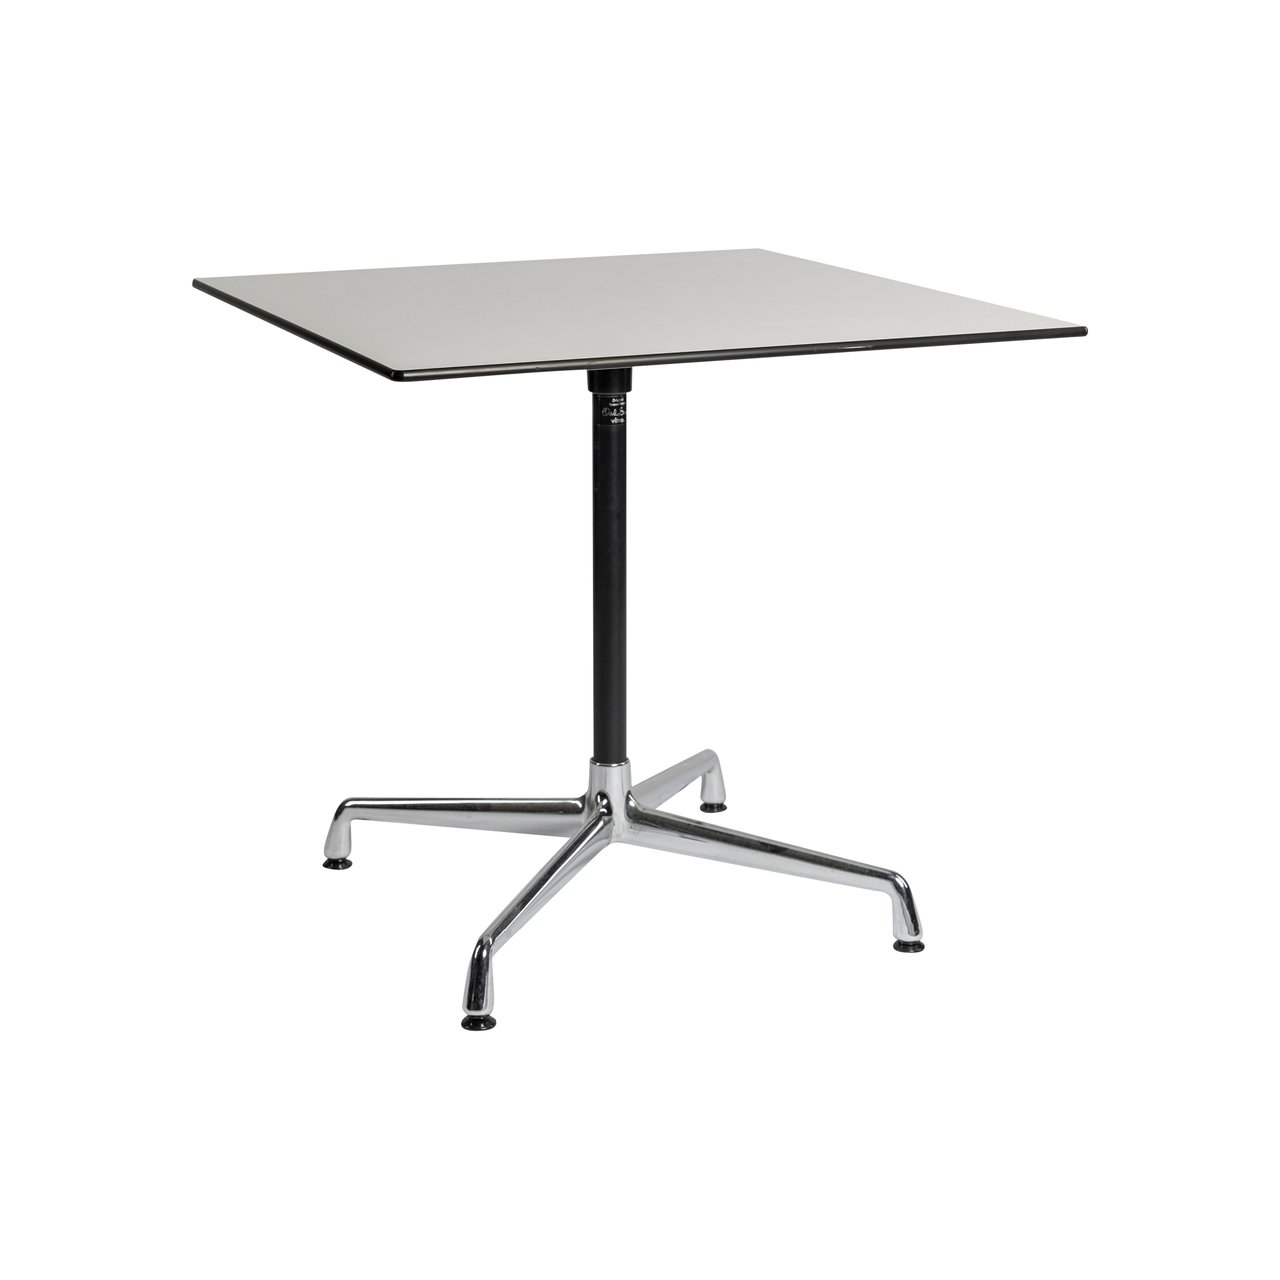 Vitra Eames Contract table